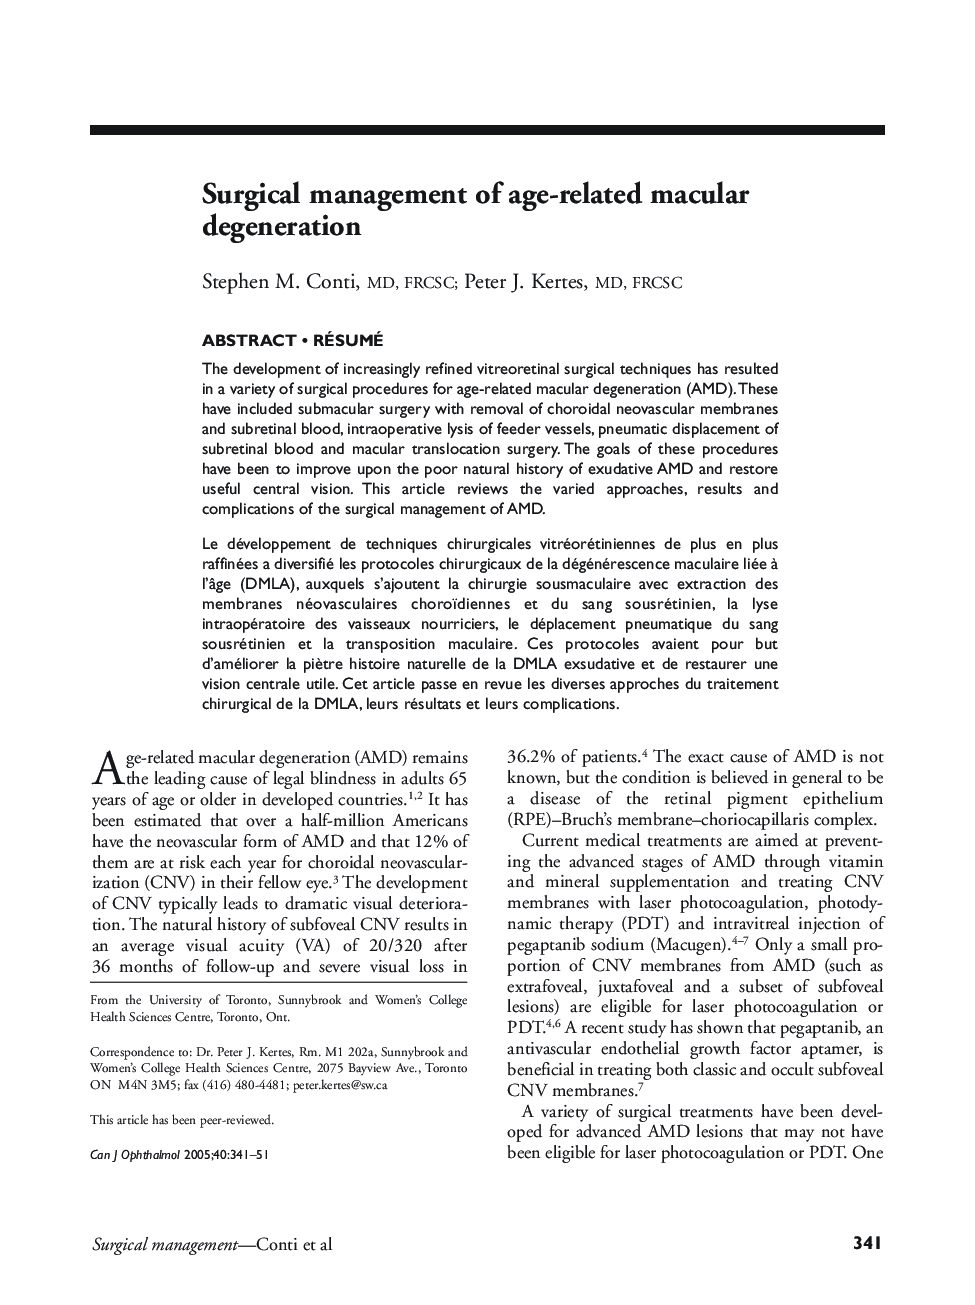 Surgical management of age-related macular degeneration